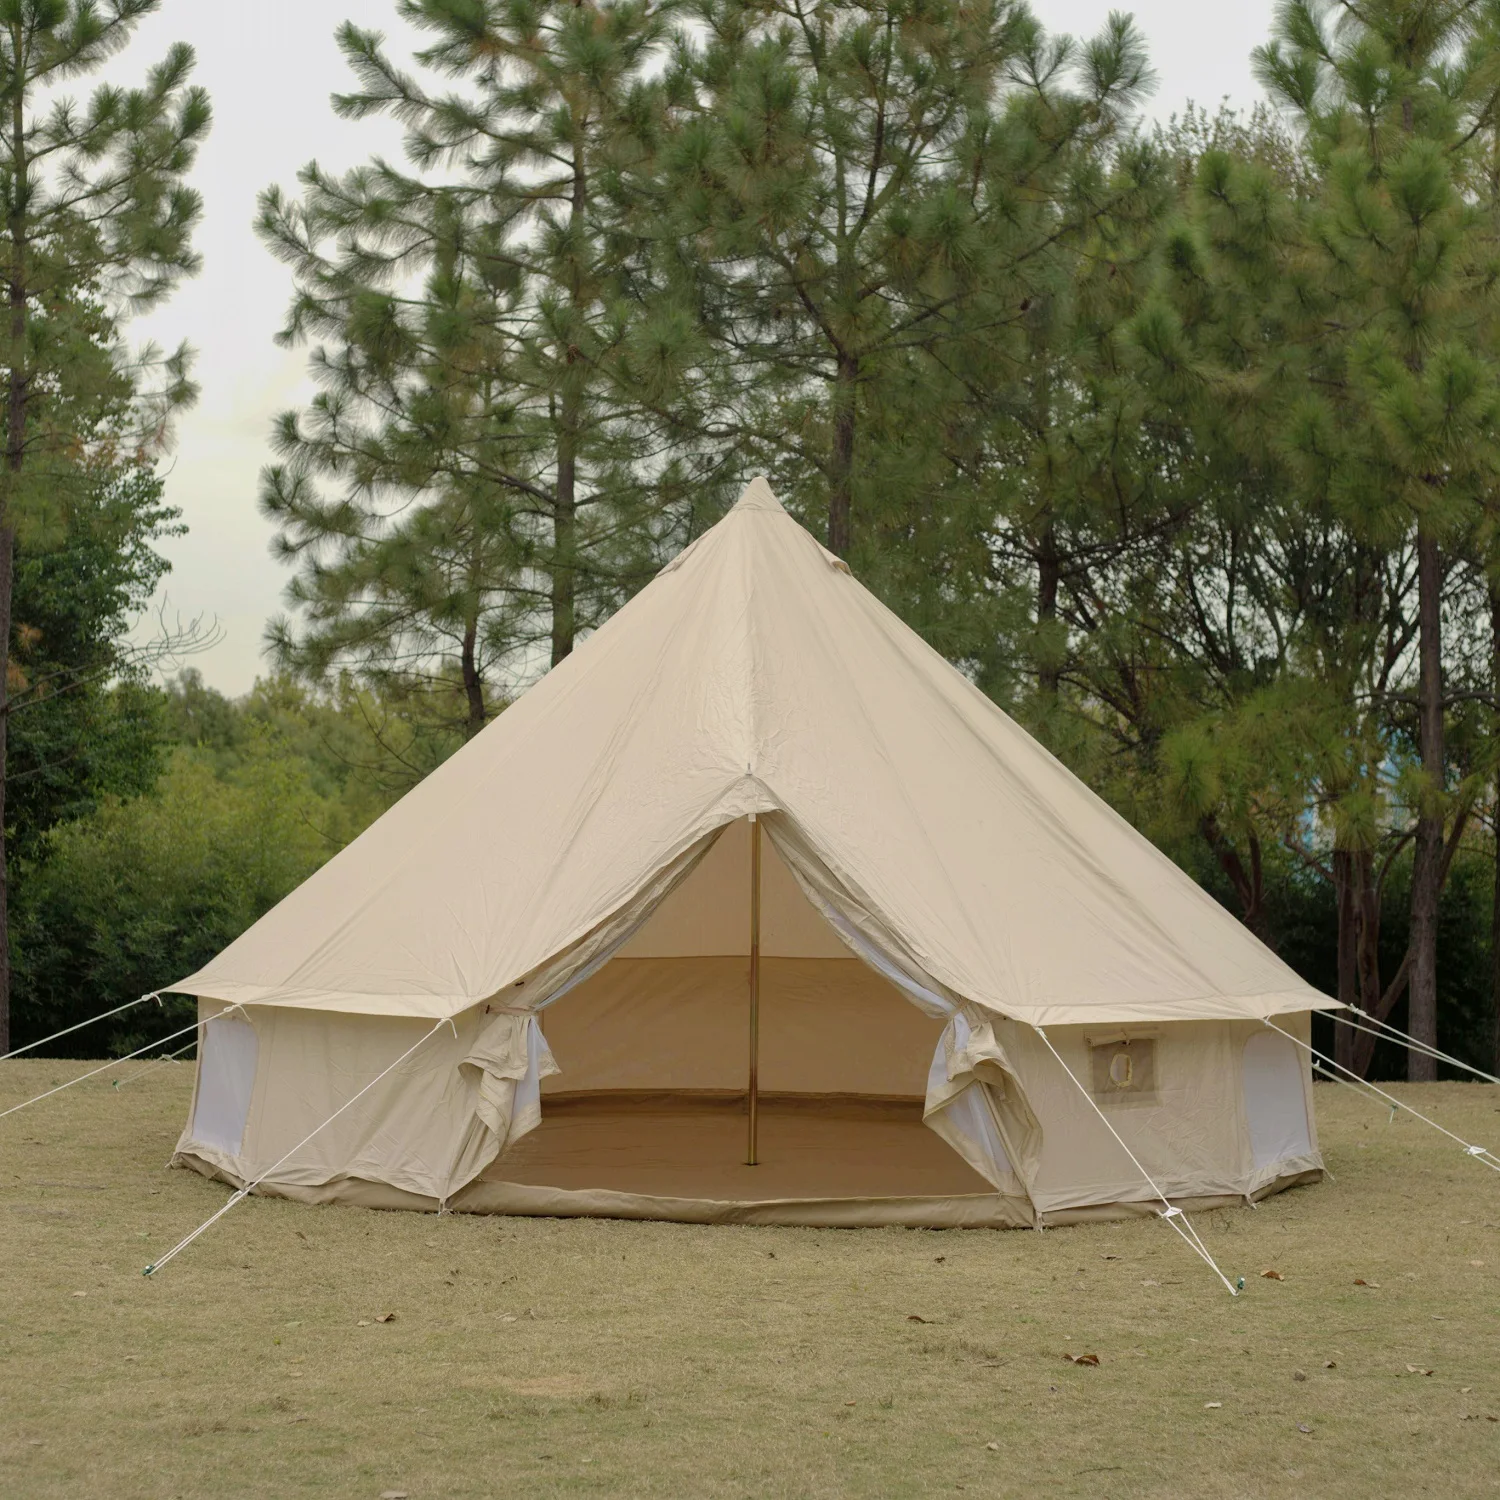 

Remaco New Design 3M/4M/5M/6M Outdoor Camping Luxury Yurt Zelt Glamping 4 Season 5-12 Persons Family Canvas Cotton Bell Tent